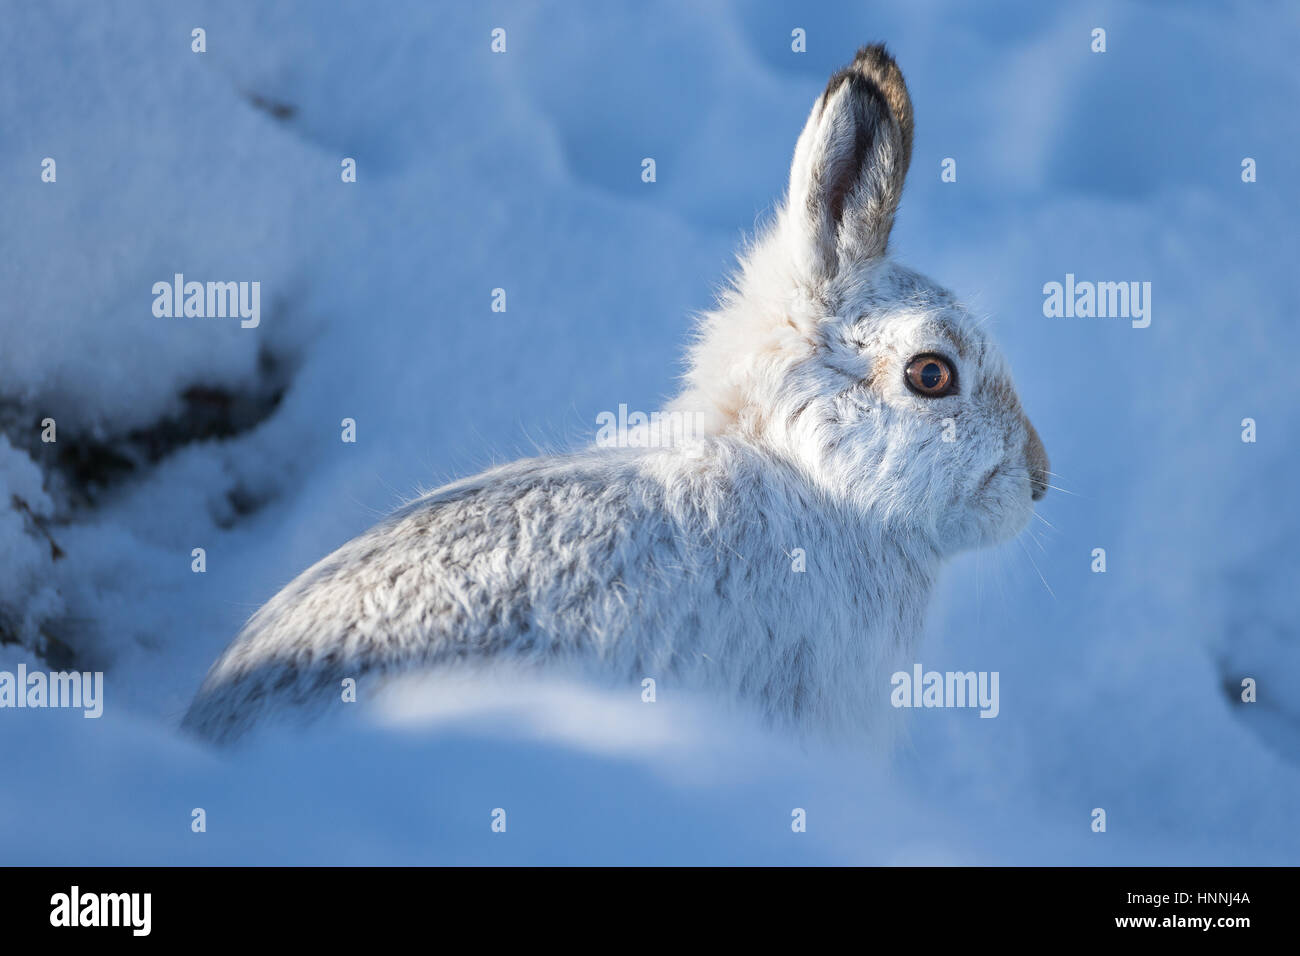 Scottish Mountain Hare (Lepus timidus) in a snowy landscape in the Cairngorms National Park, Highlands, Scotland, Great Britain Stock Photo